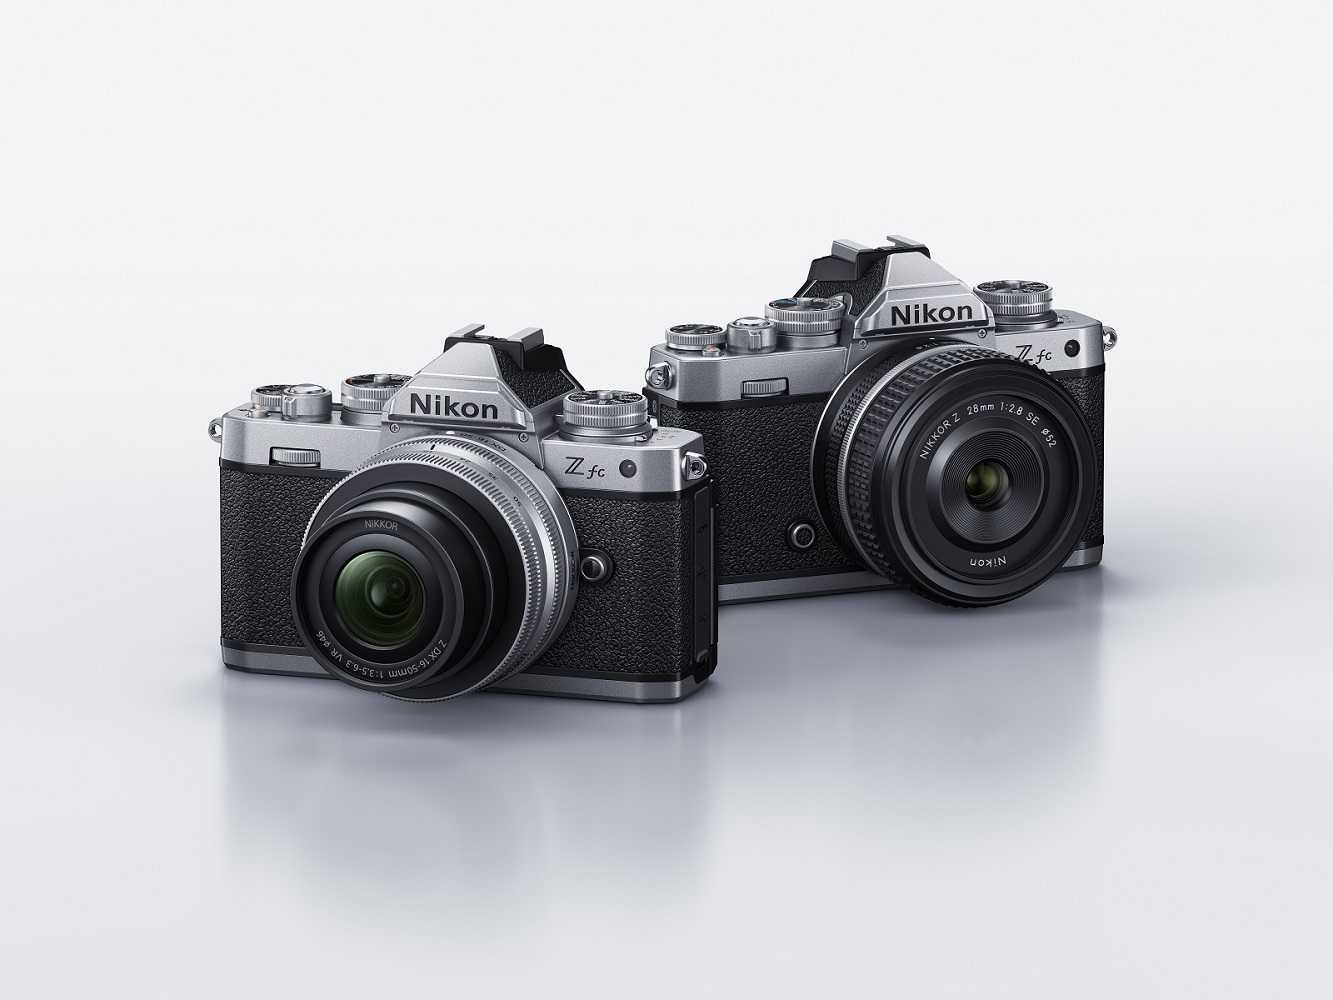 NIKON Z fc: between innovation and tradition